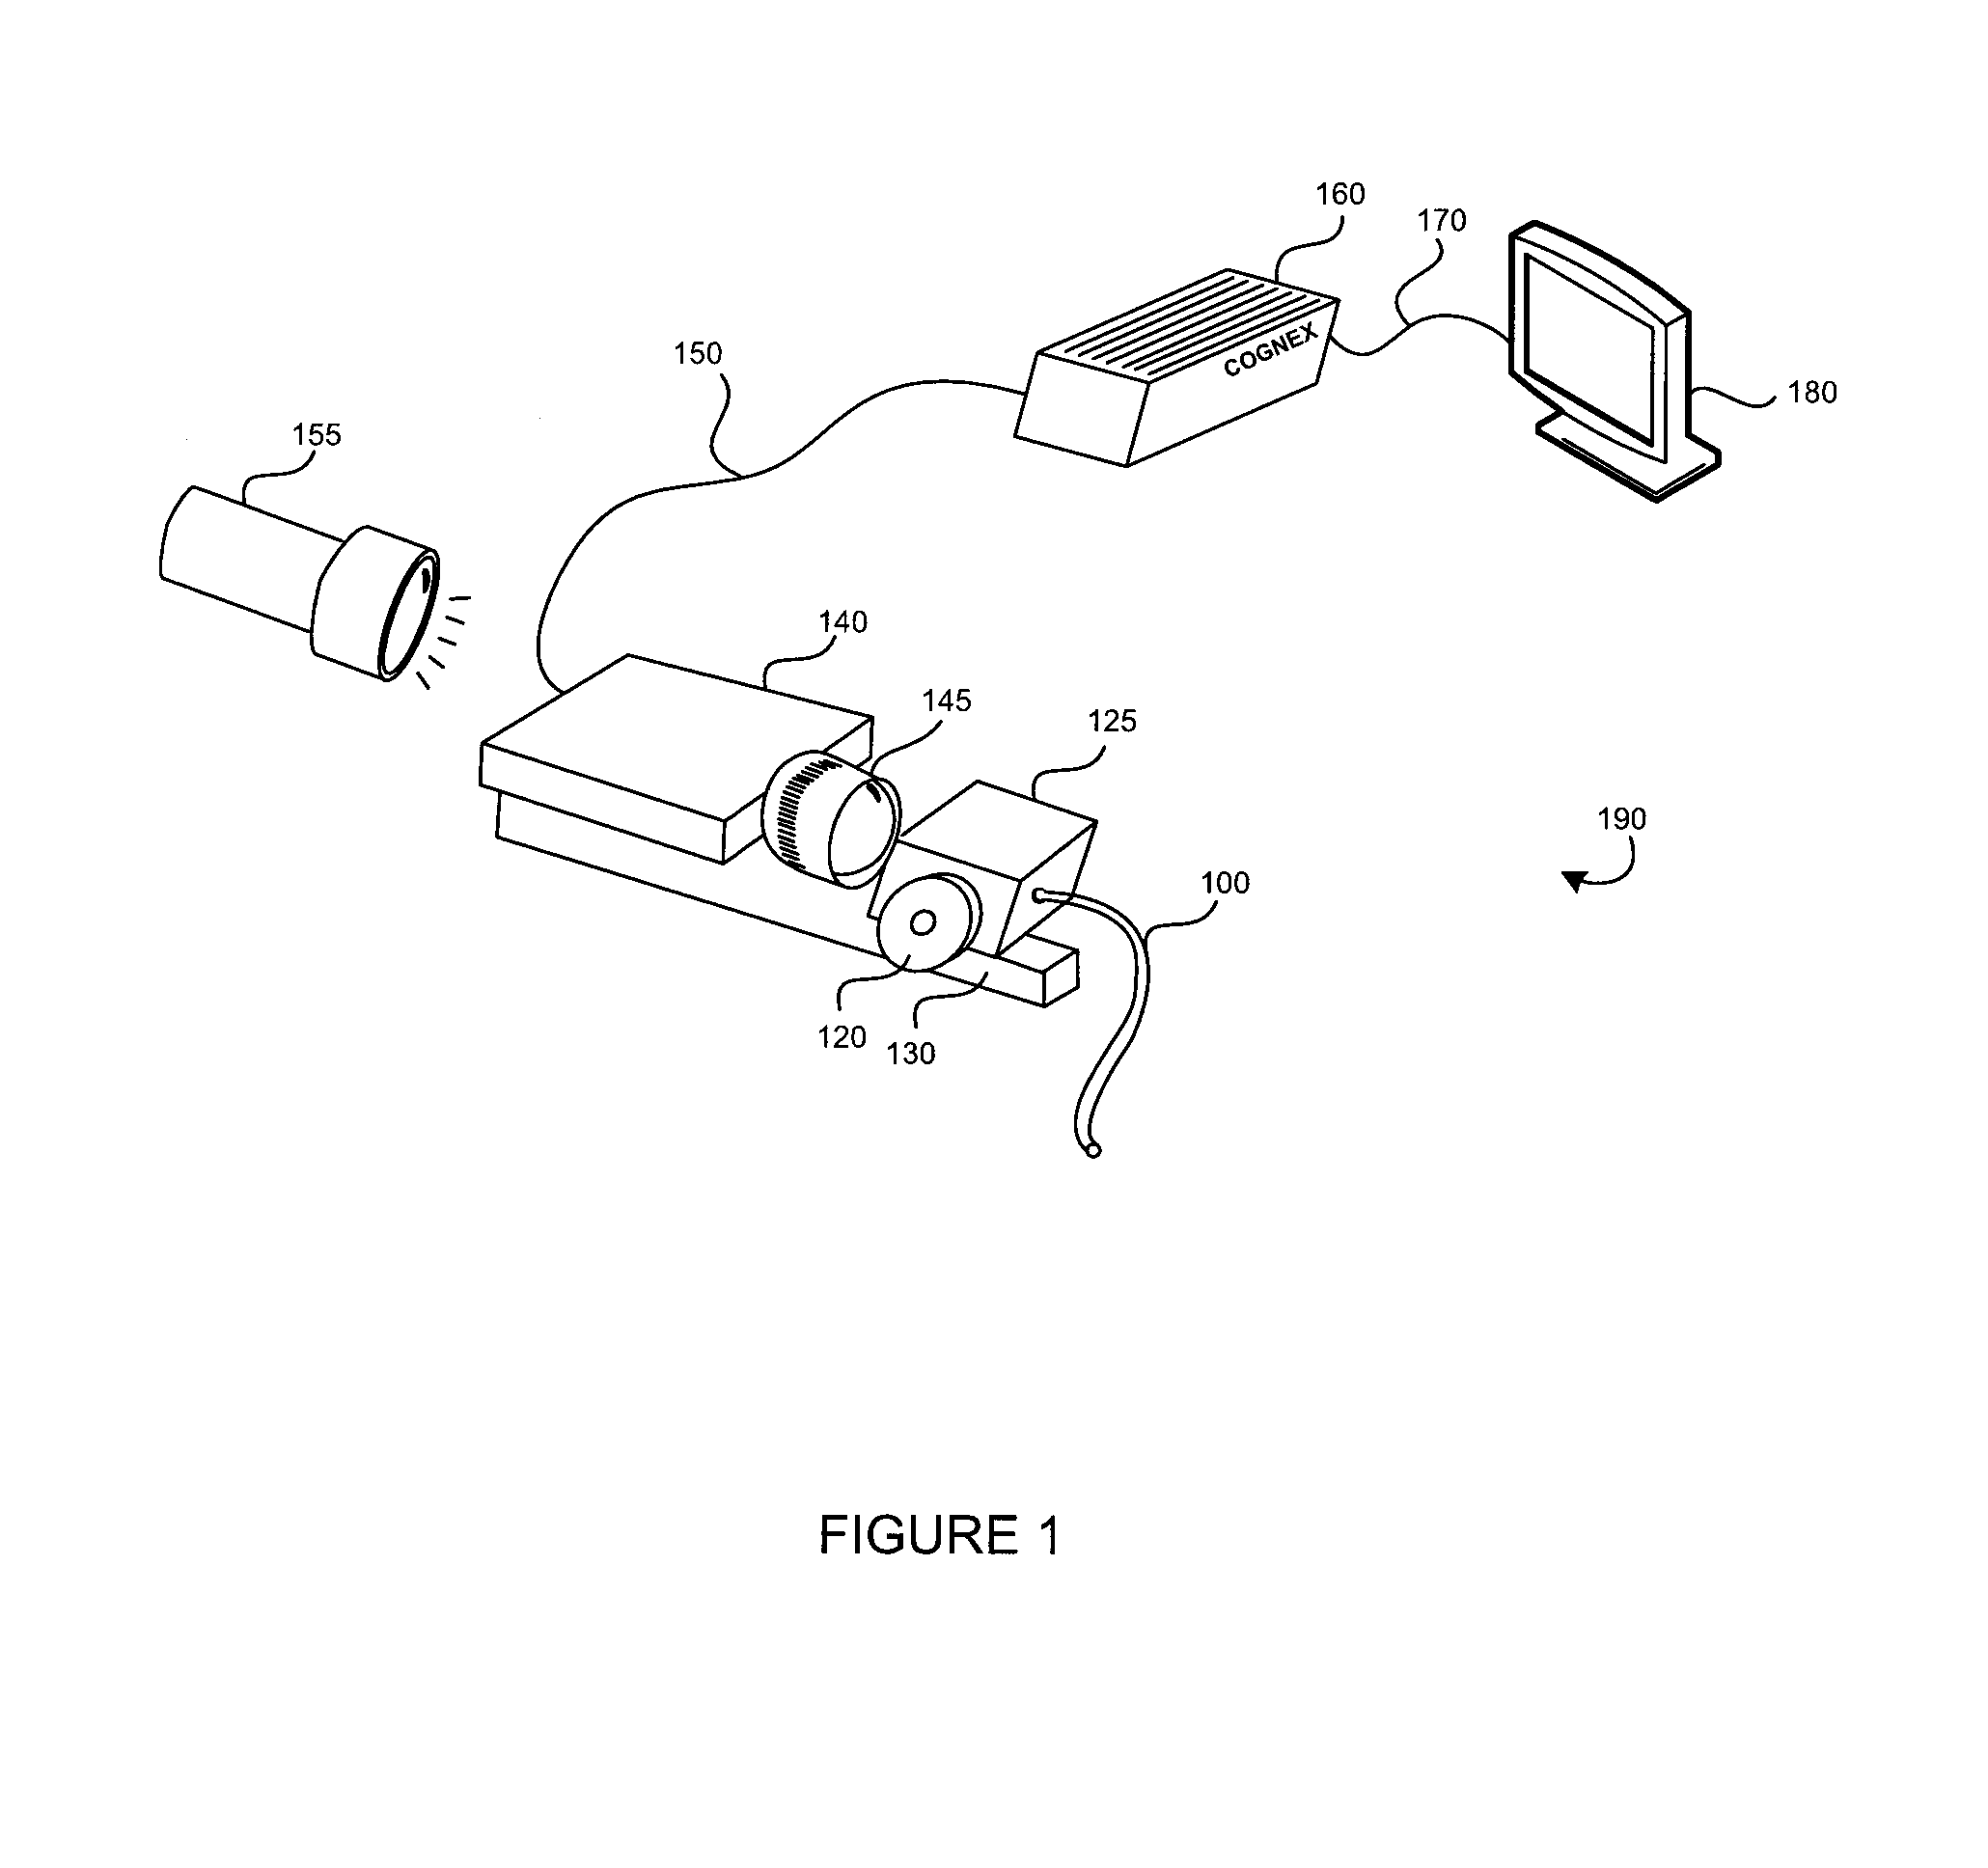 Method for generating a focused image of an object